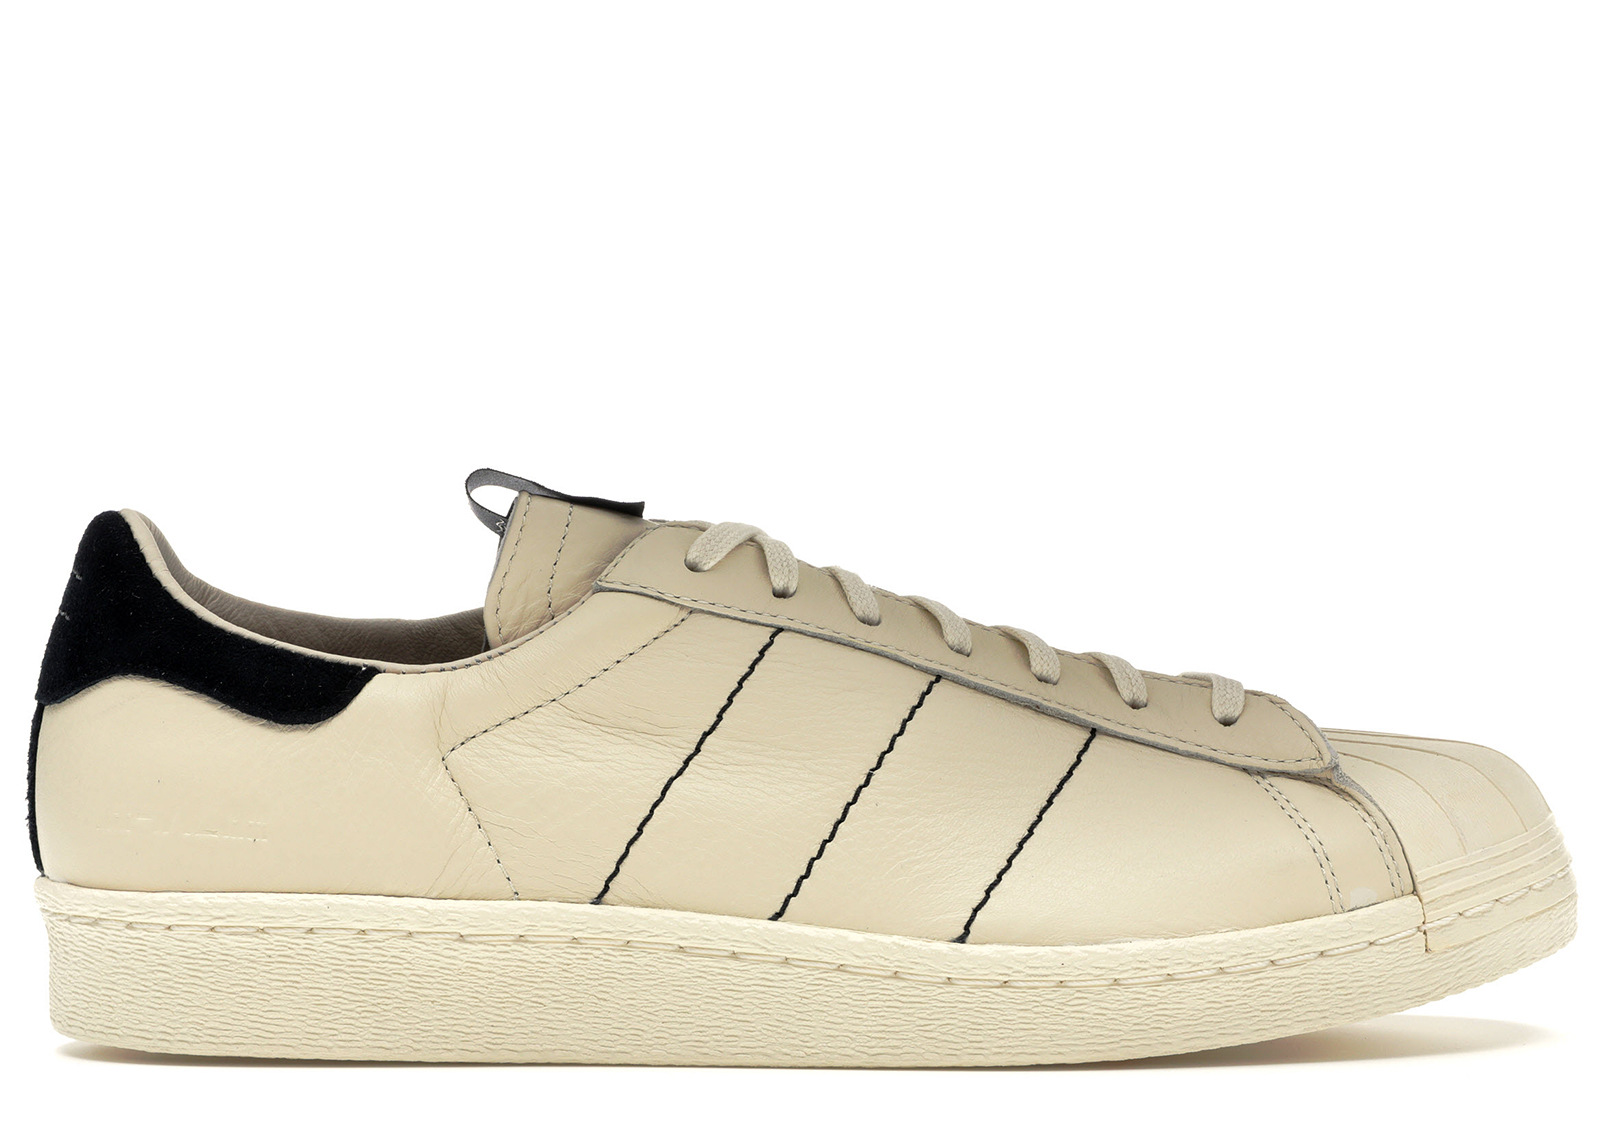 adidas superstar 80s for sale